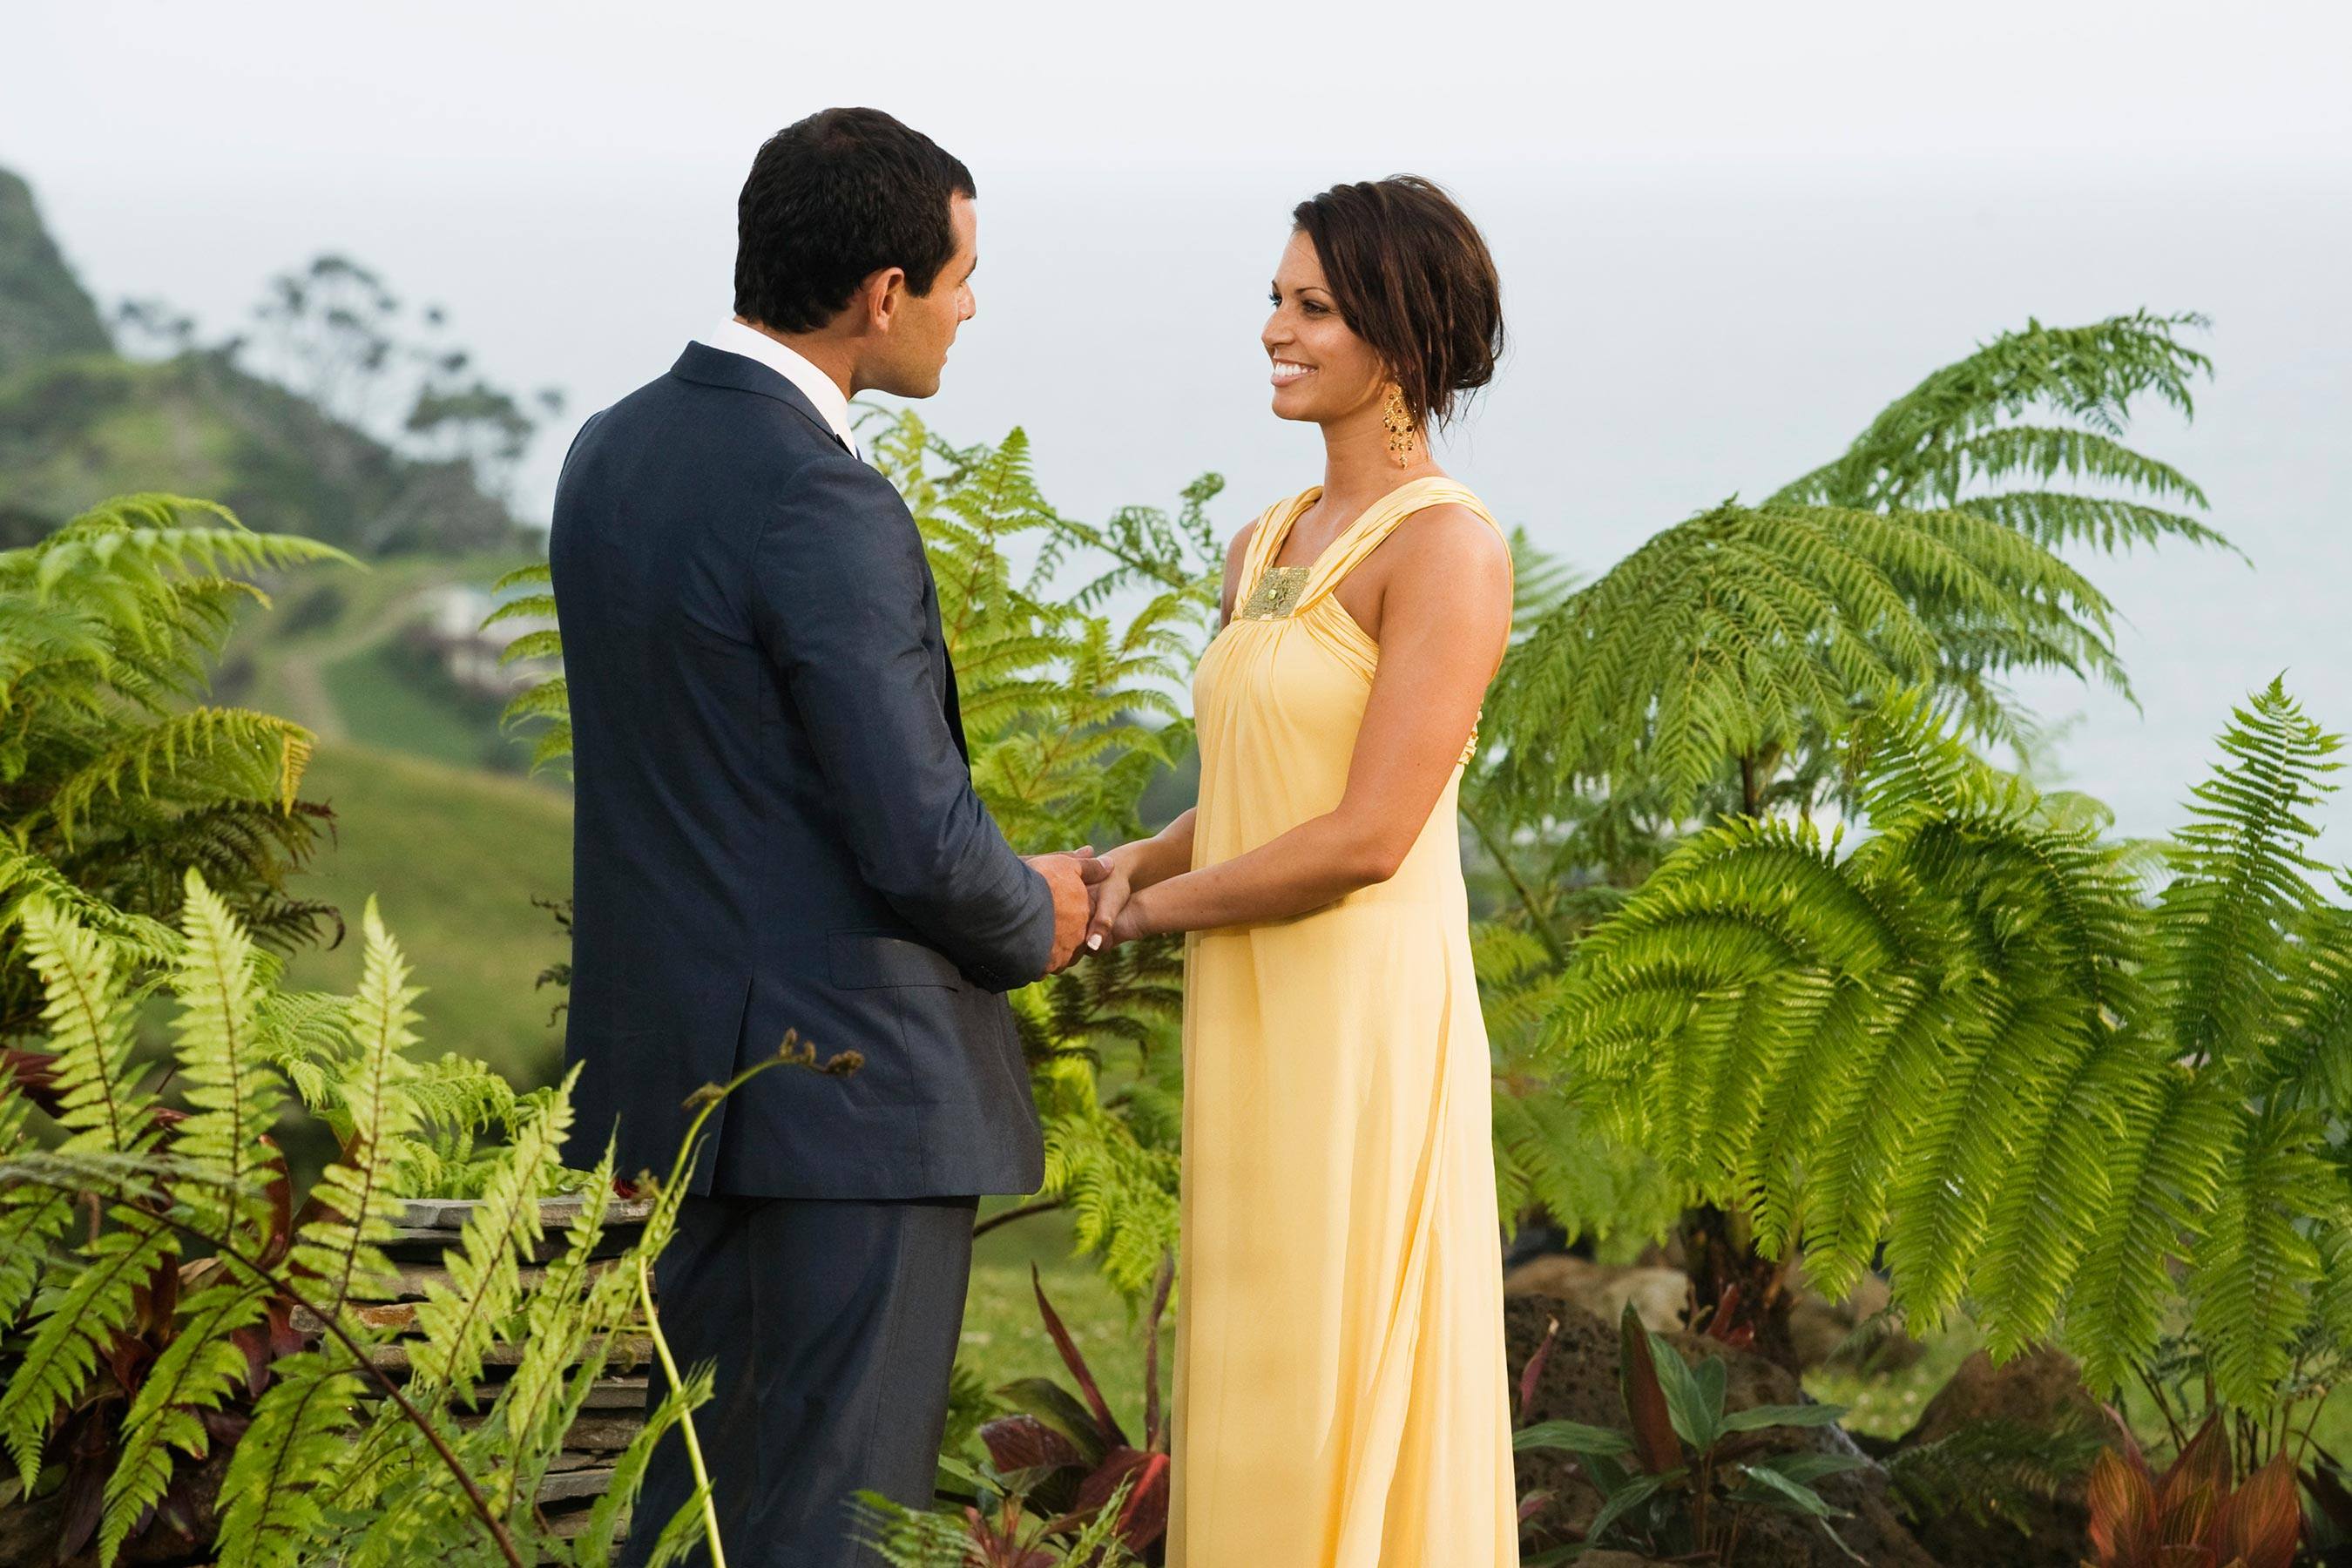 THE BACHELOR - "Episode 1308" - In this gripping special conclusion, Jason prepares to make one of the most difficult decisions of this life. With his search for love now narrowed down to Melissa and Molly, Jason brings his son, Ty, to New Zealand to meet the remaining two women. The bachelorettes are also introduced to his family. Finally, the women lay their hearts on the line, each trying to guarantee that she will be the one to get Jason's final rose. But the Bachelor is stunned when DeAnna, the woman who broke his heart, shows up in New Zealand to see him. In one of the most romantic and dramatic moments in "Bachelor" history, Jason makes a decision that will change his life forever, on the season finale of "The Bachelor," MONDAY, MARCH 2 (8:00-10:02 p.m., ET), on the ABC Television Network. (ABC/MATT KLITSCHER) 